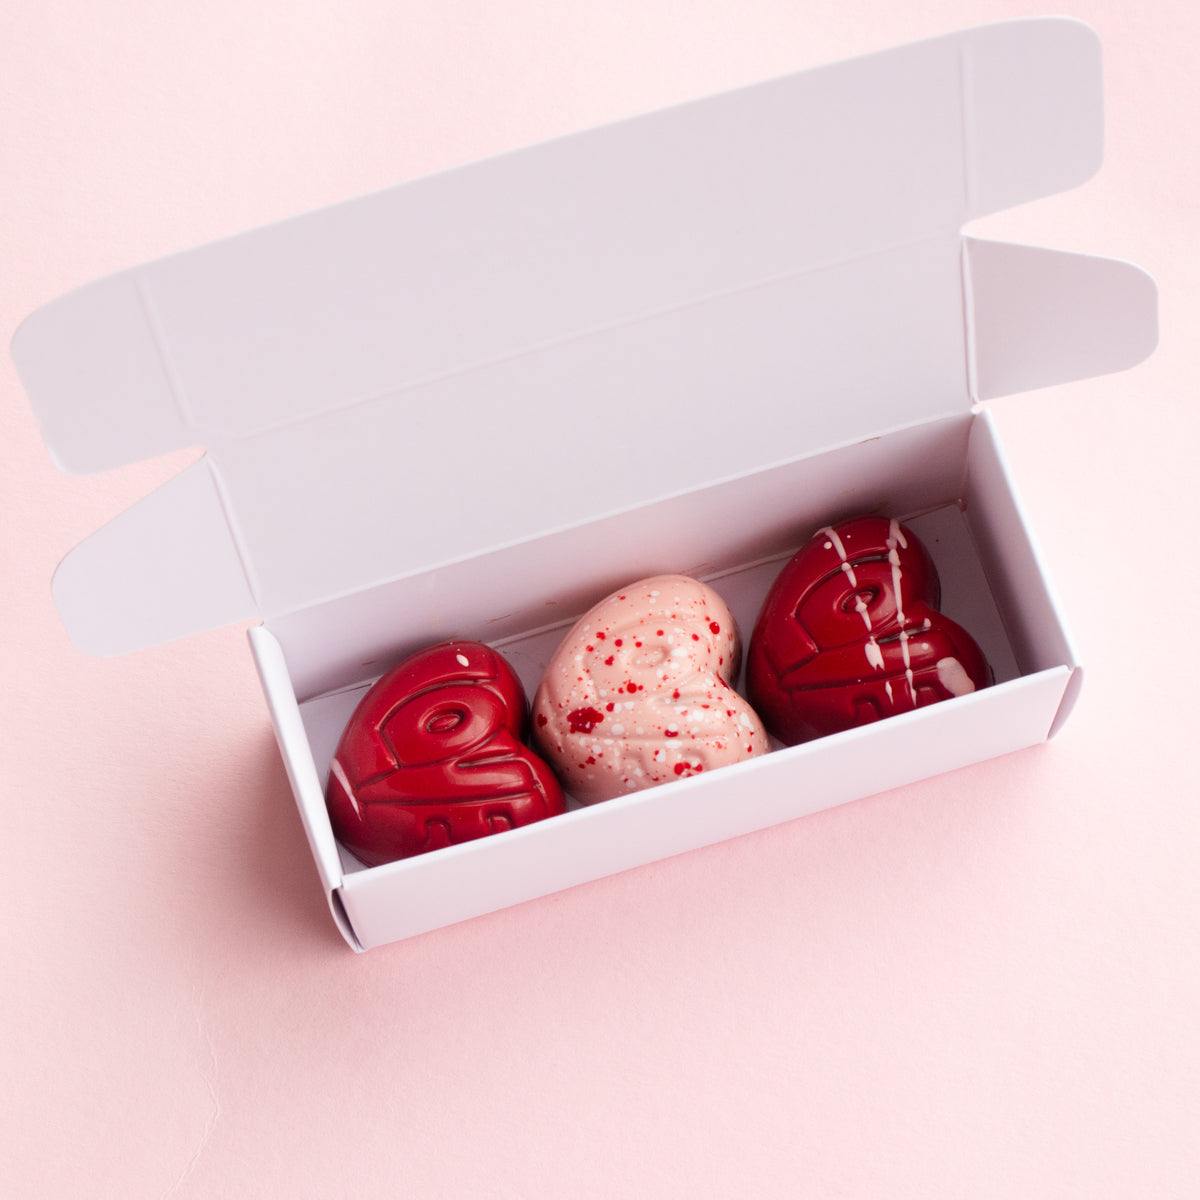 Creation of the Month | 3 Piece 'Love' Bonbons